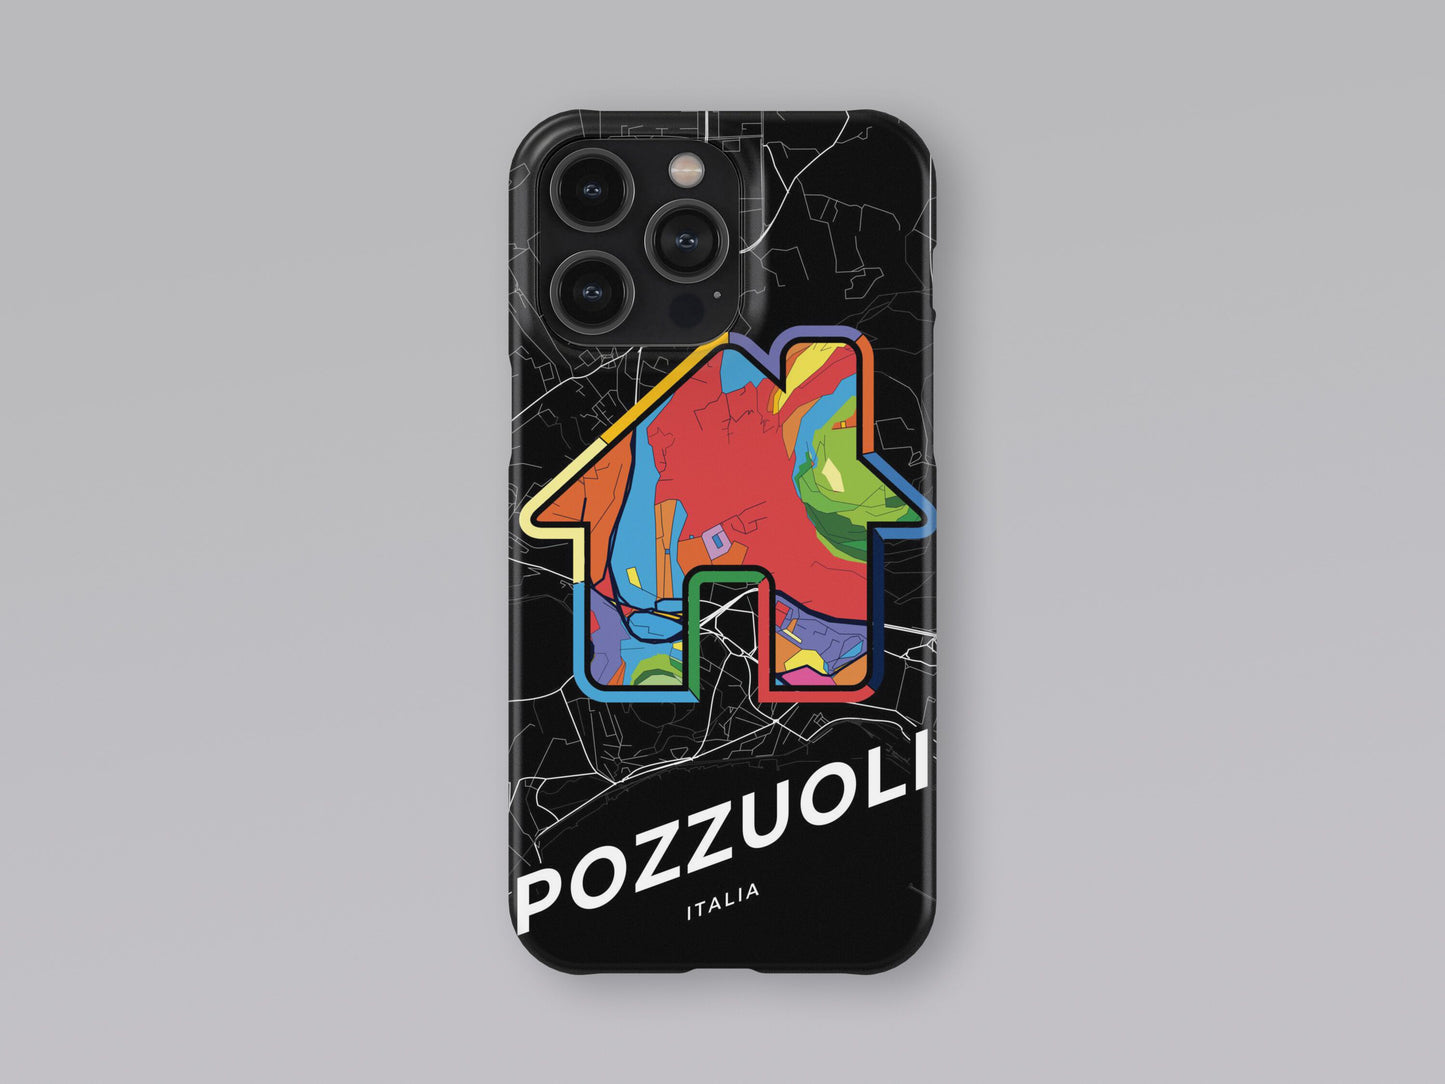 Pozzuoli Italy slim phone case with colorful icon. Birthday, wedding or housewarming gift. Couple match cases. 3